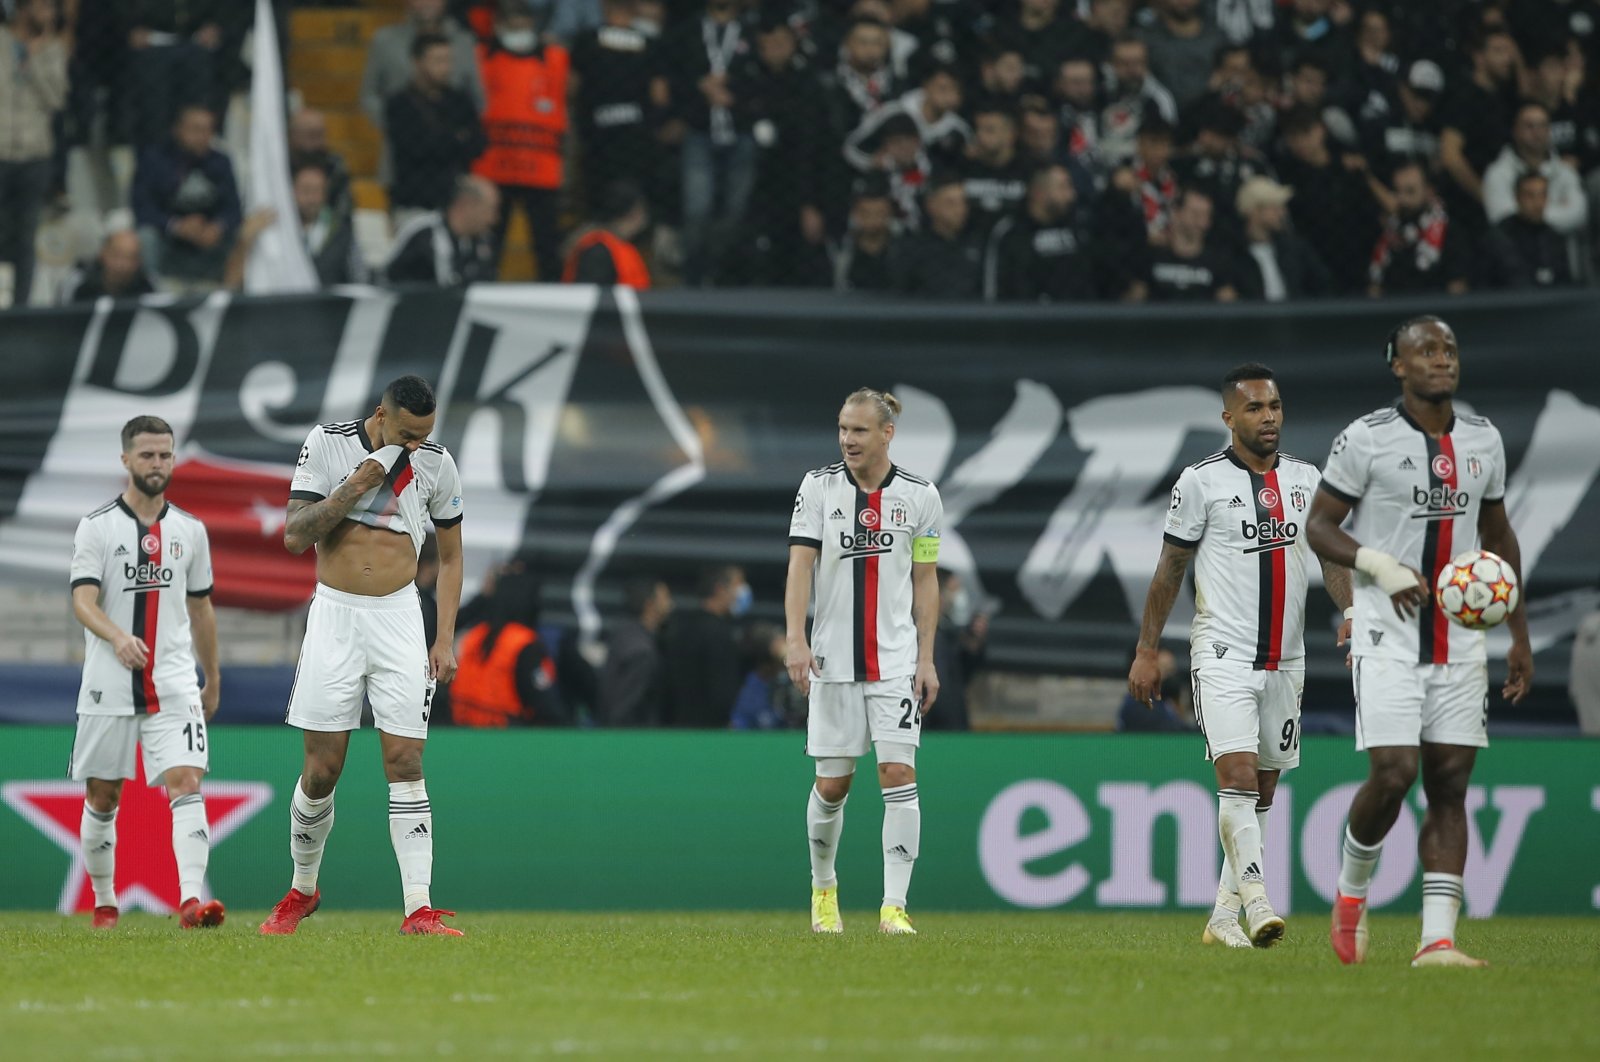 Beşiktaş players walk along the pitch after Sporting CP scored its third goal during Champions League group C football match between Beşiktaş and Sporting CP at the Vodafone Park Stadium in Istanbul, Turkey, Oct. 19, 2021. (AP Photo)